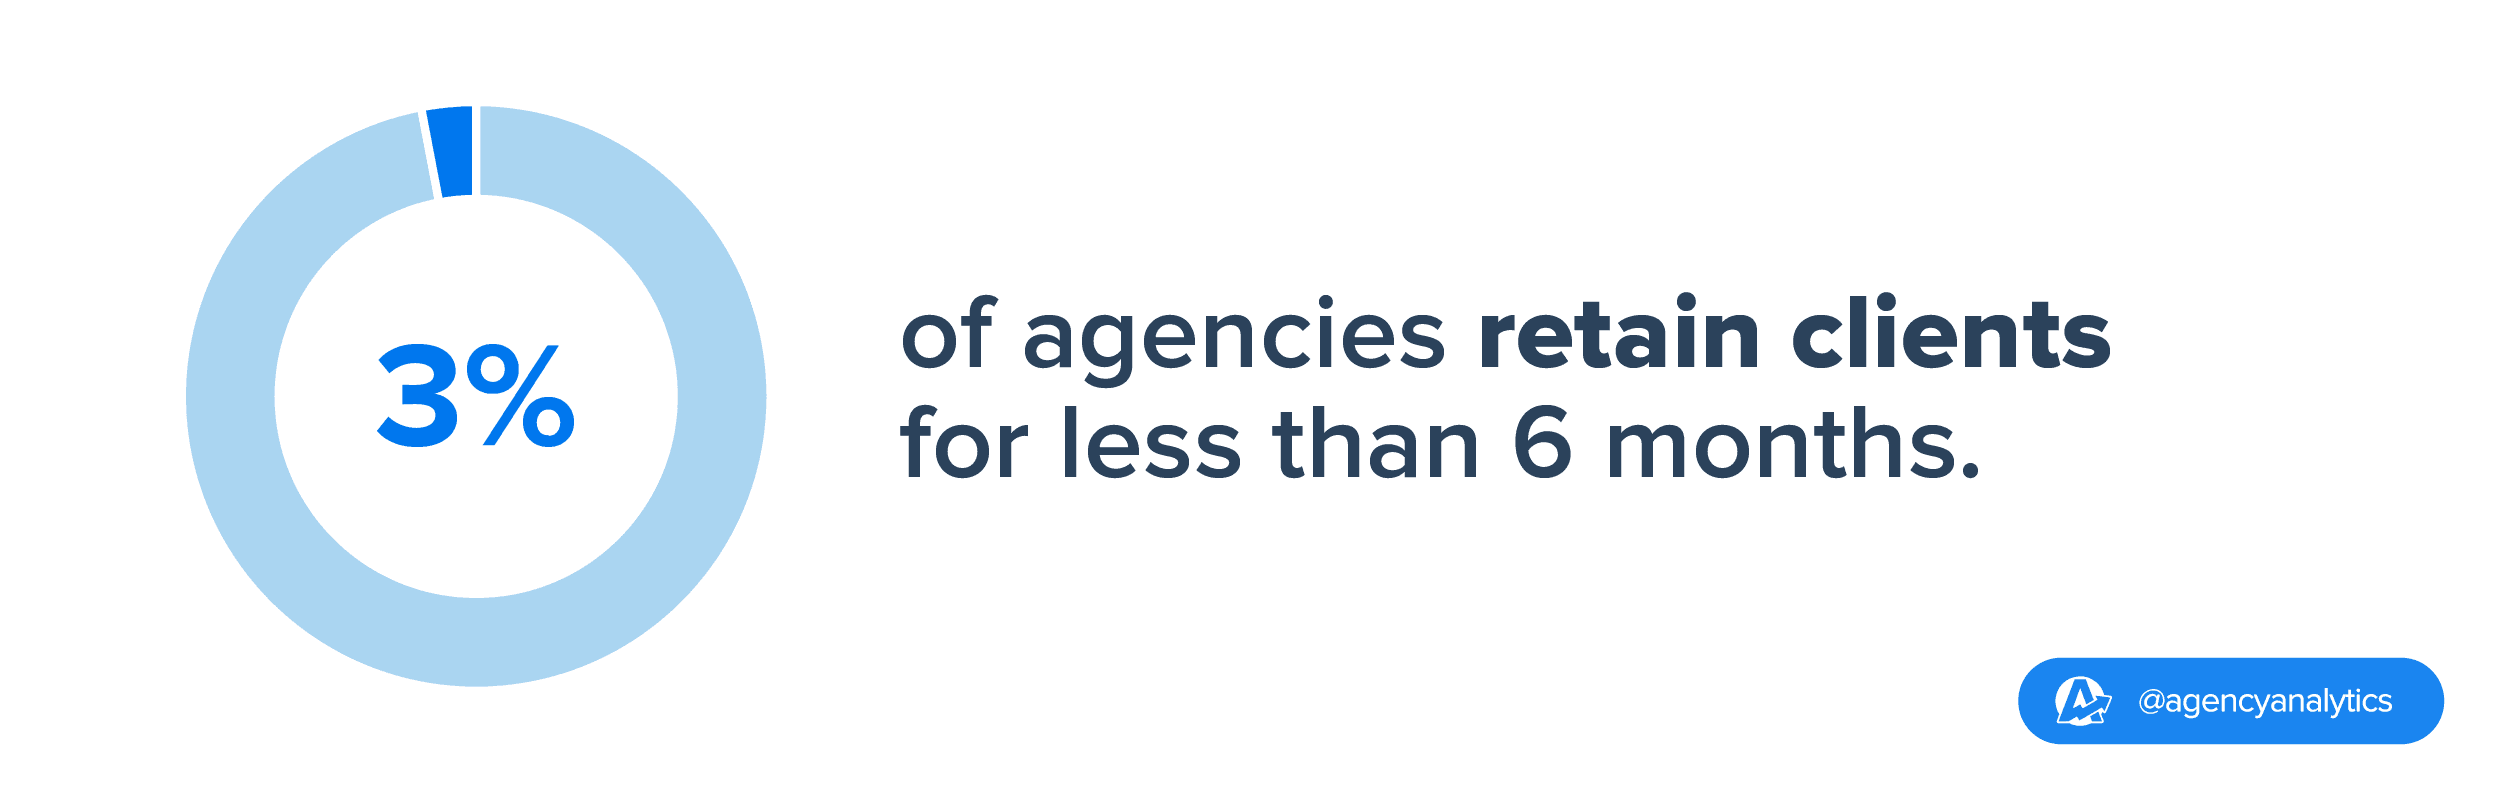 Only 3% of the surveyed agencies indicated that they retain clients for less than six months